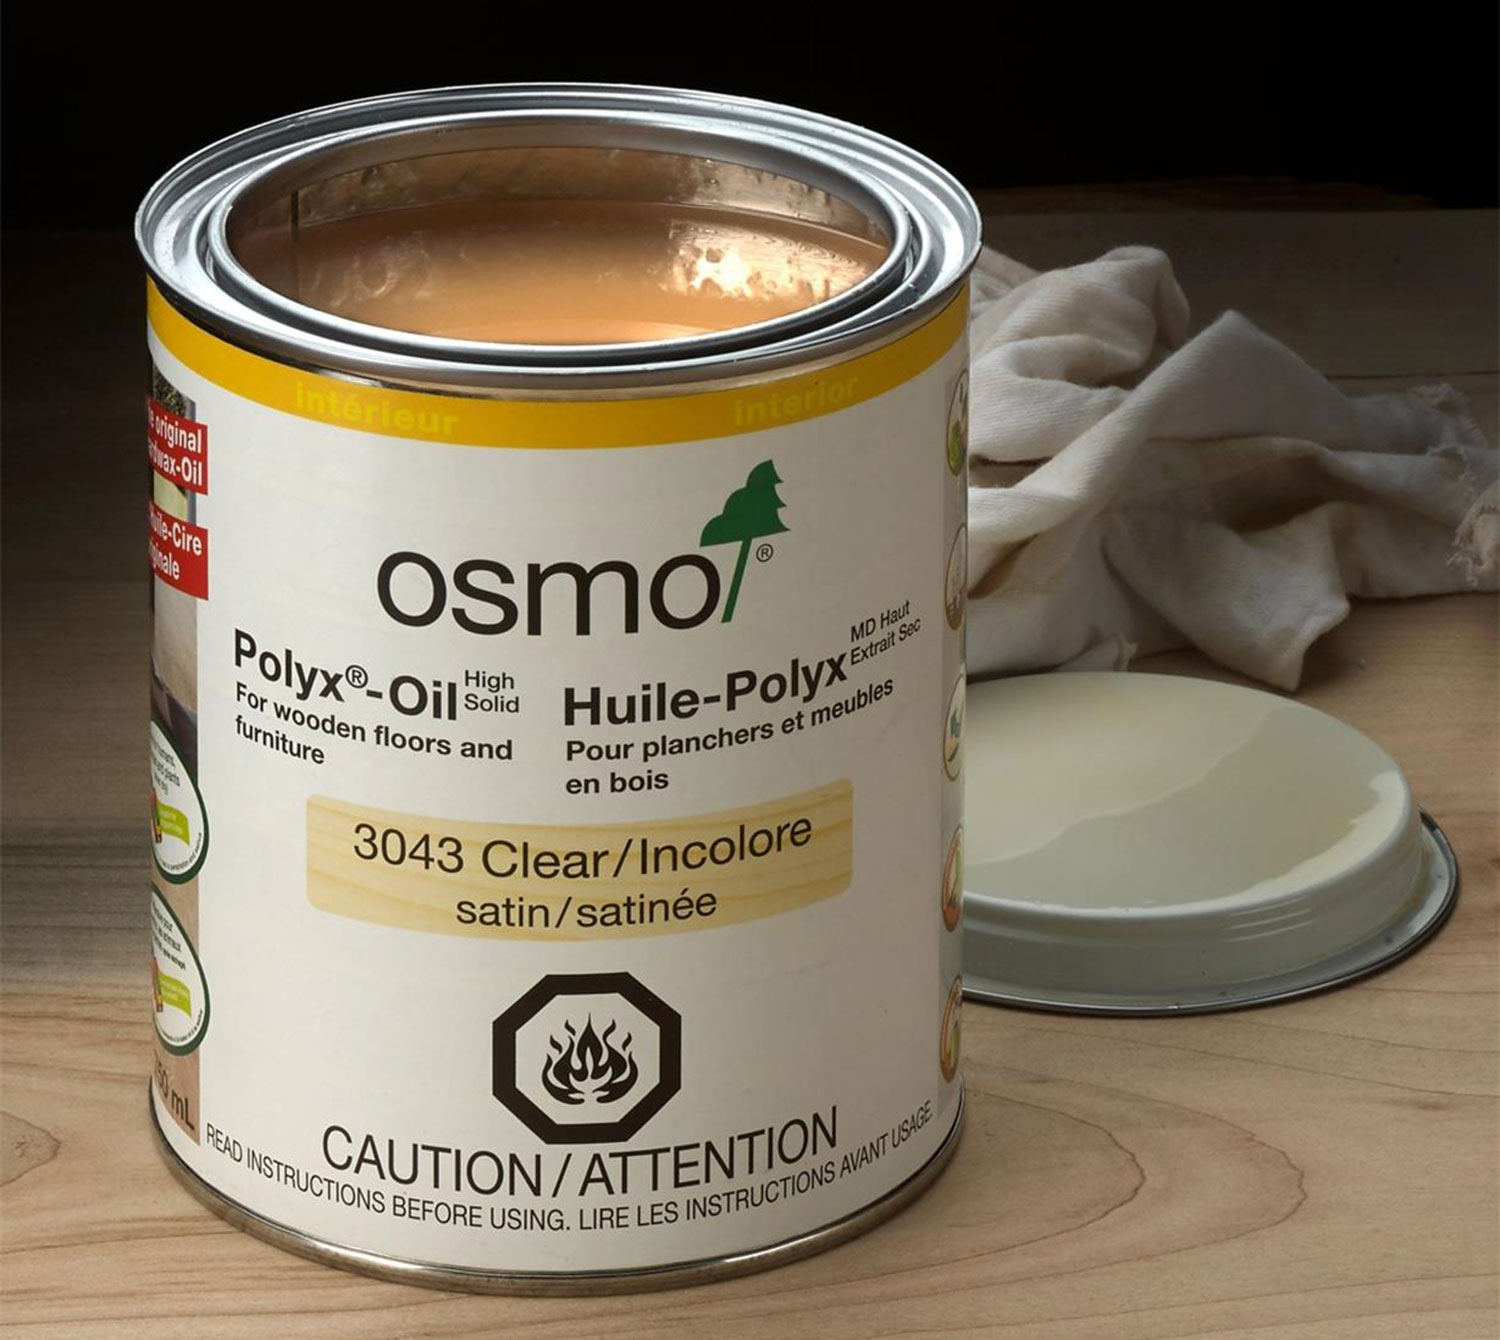 A 125ml can of Osmo Polyx sits atop an unfinished wooden surface.